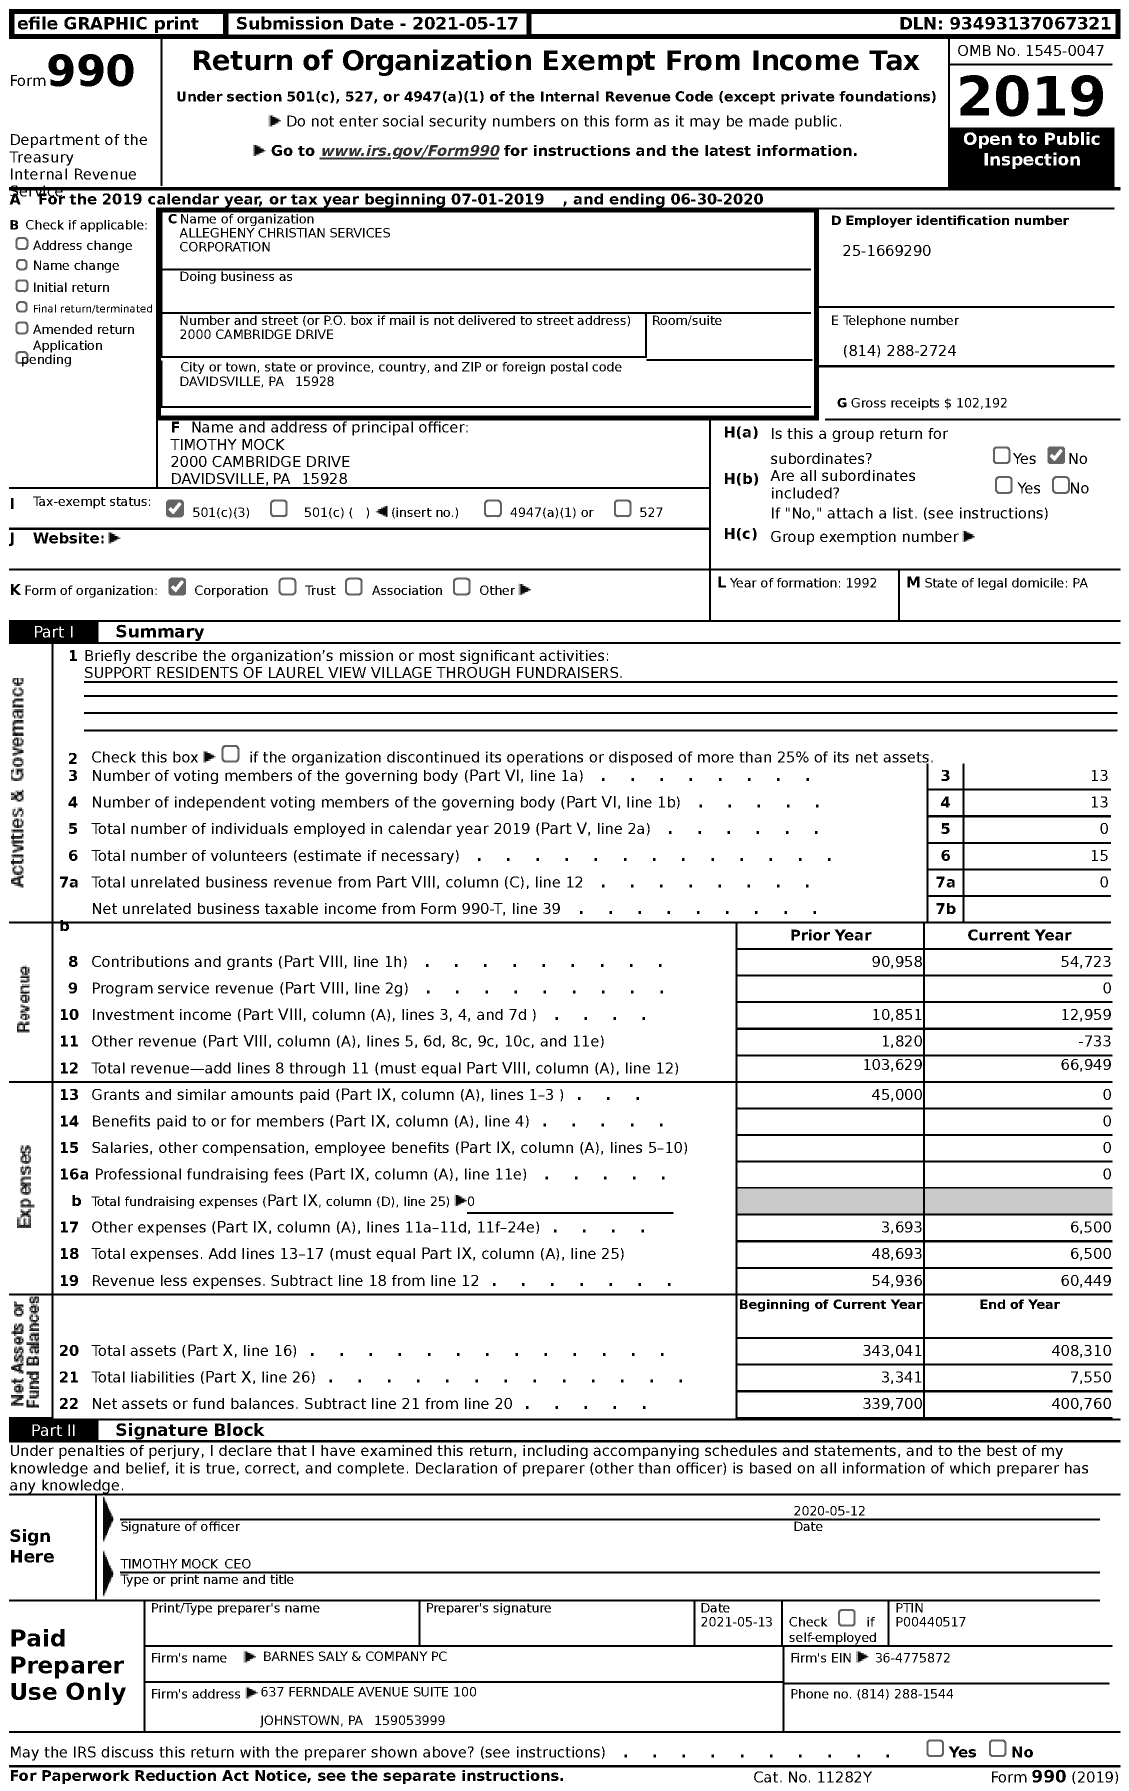 Image of first page of 2019 Form 990 for Allegheny Christian Services Corporation